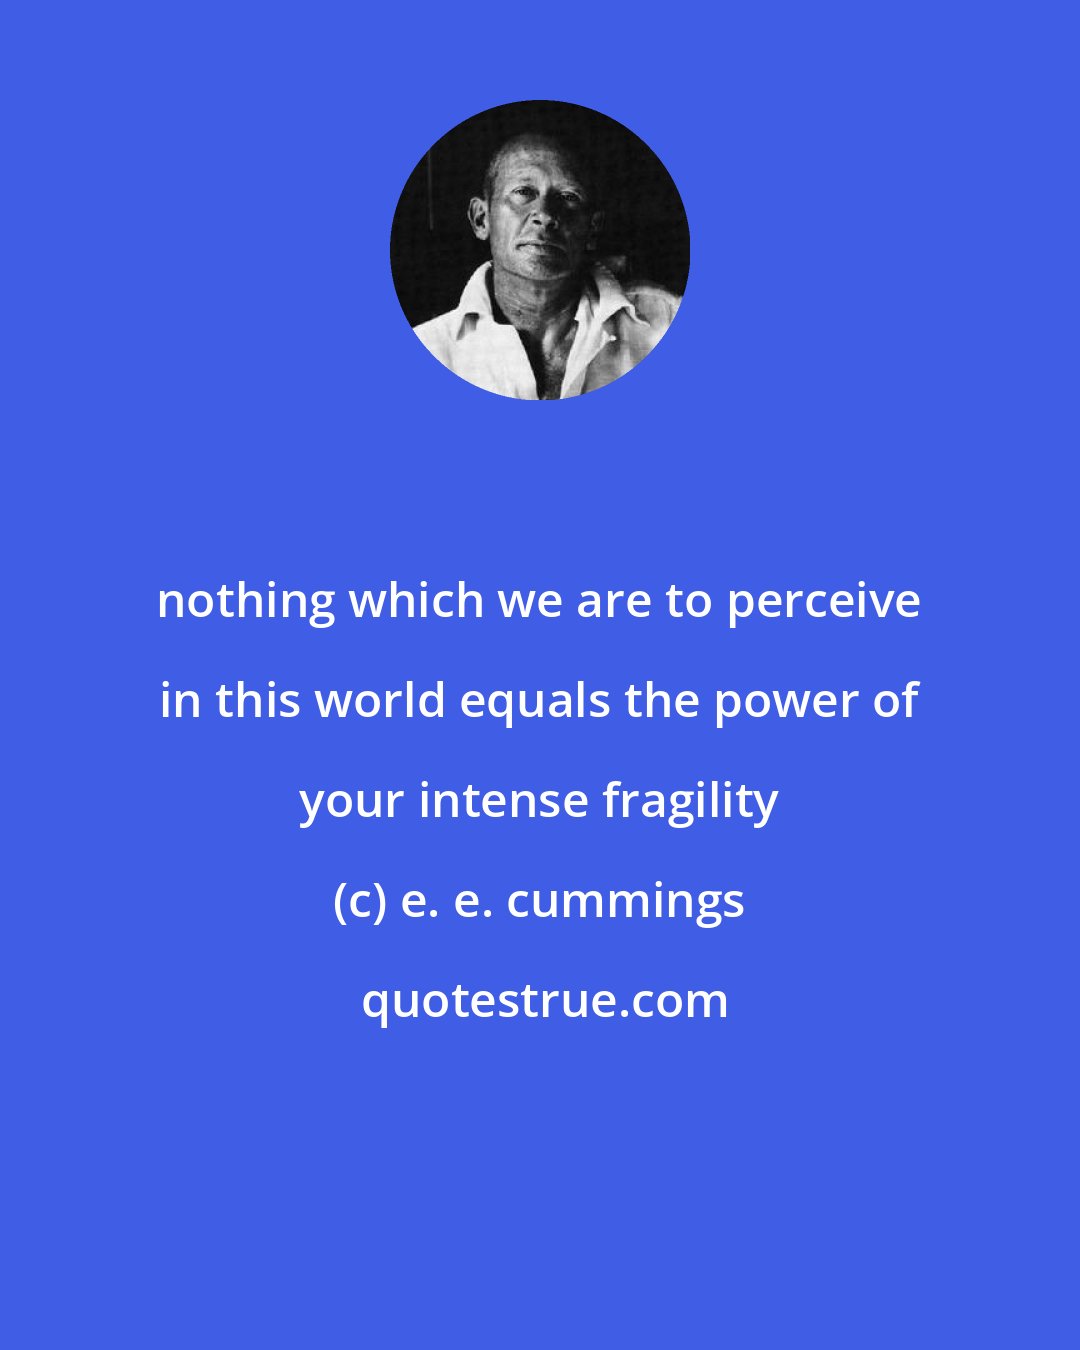 e. e. cummings: nothing which we are to perceive in this world equals the power of your intense fragility